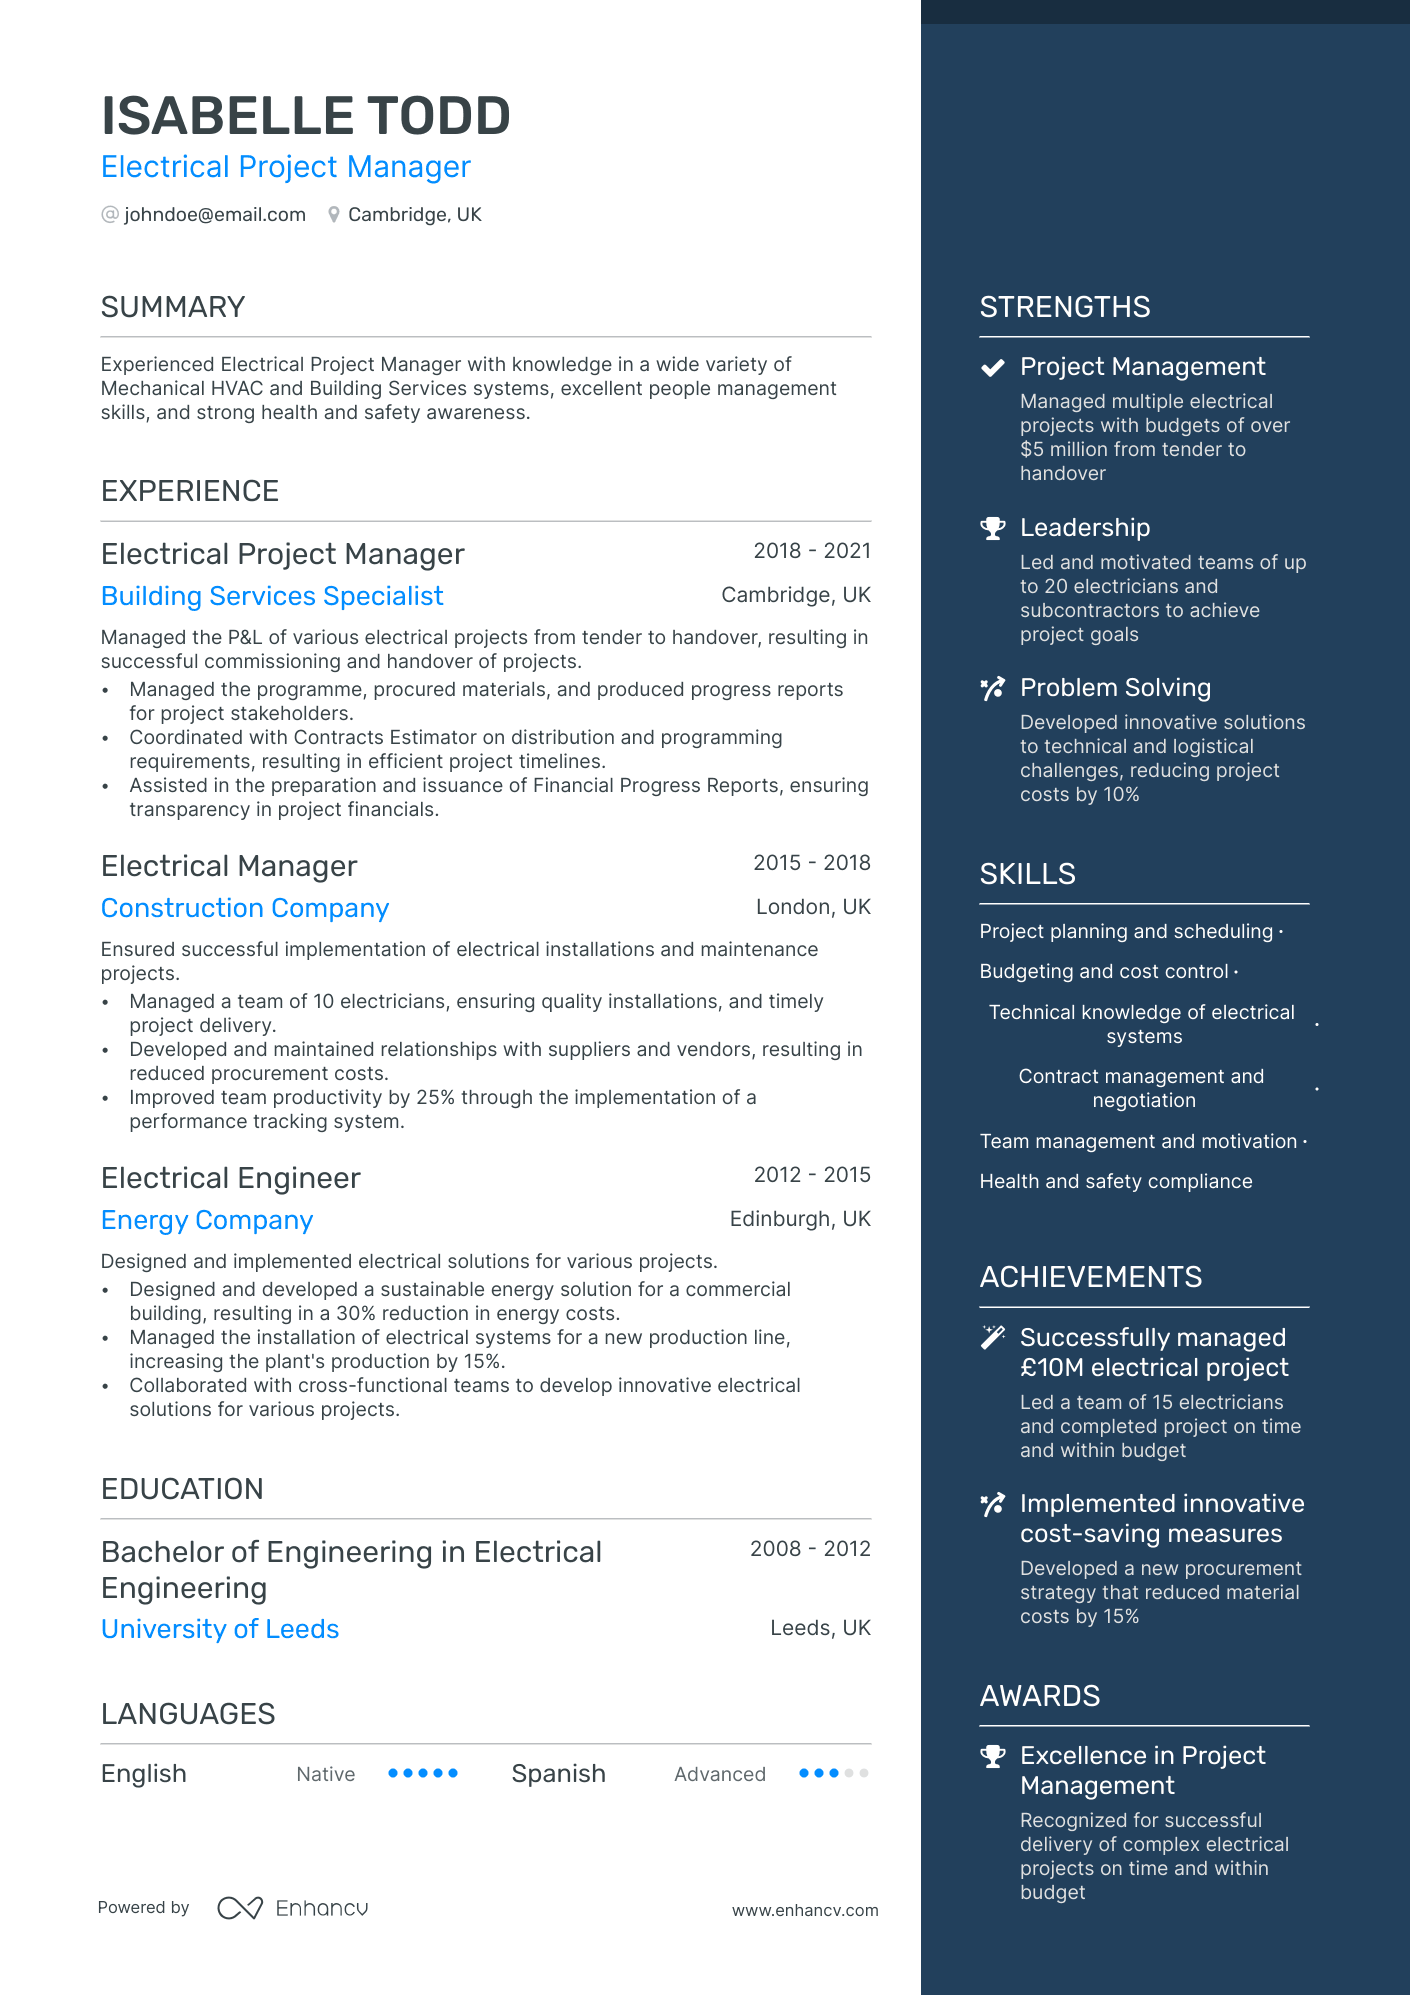 Electrical Manager resume example